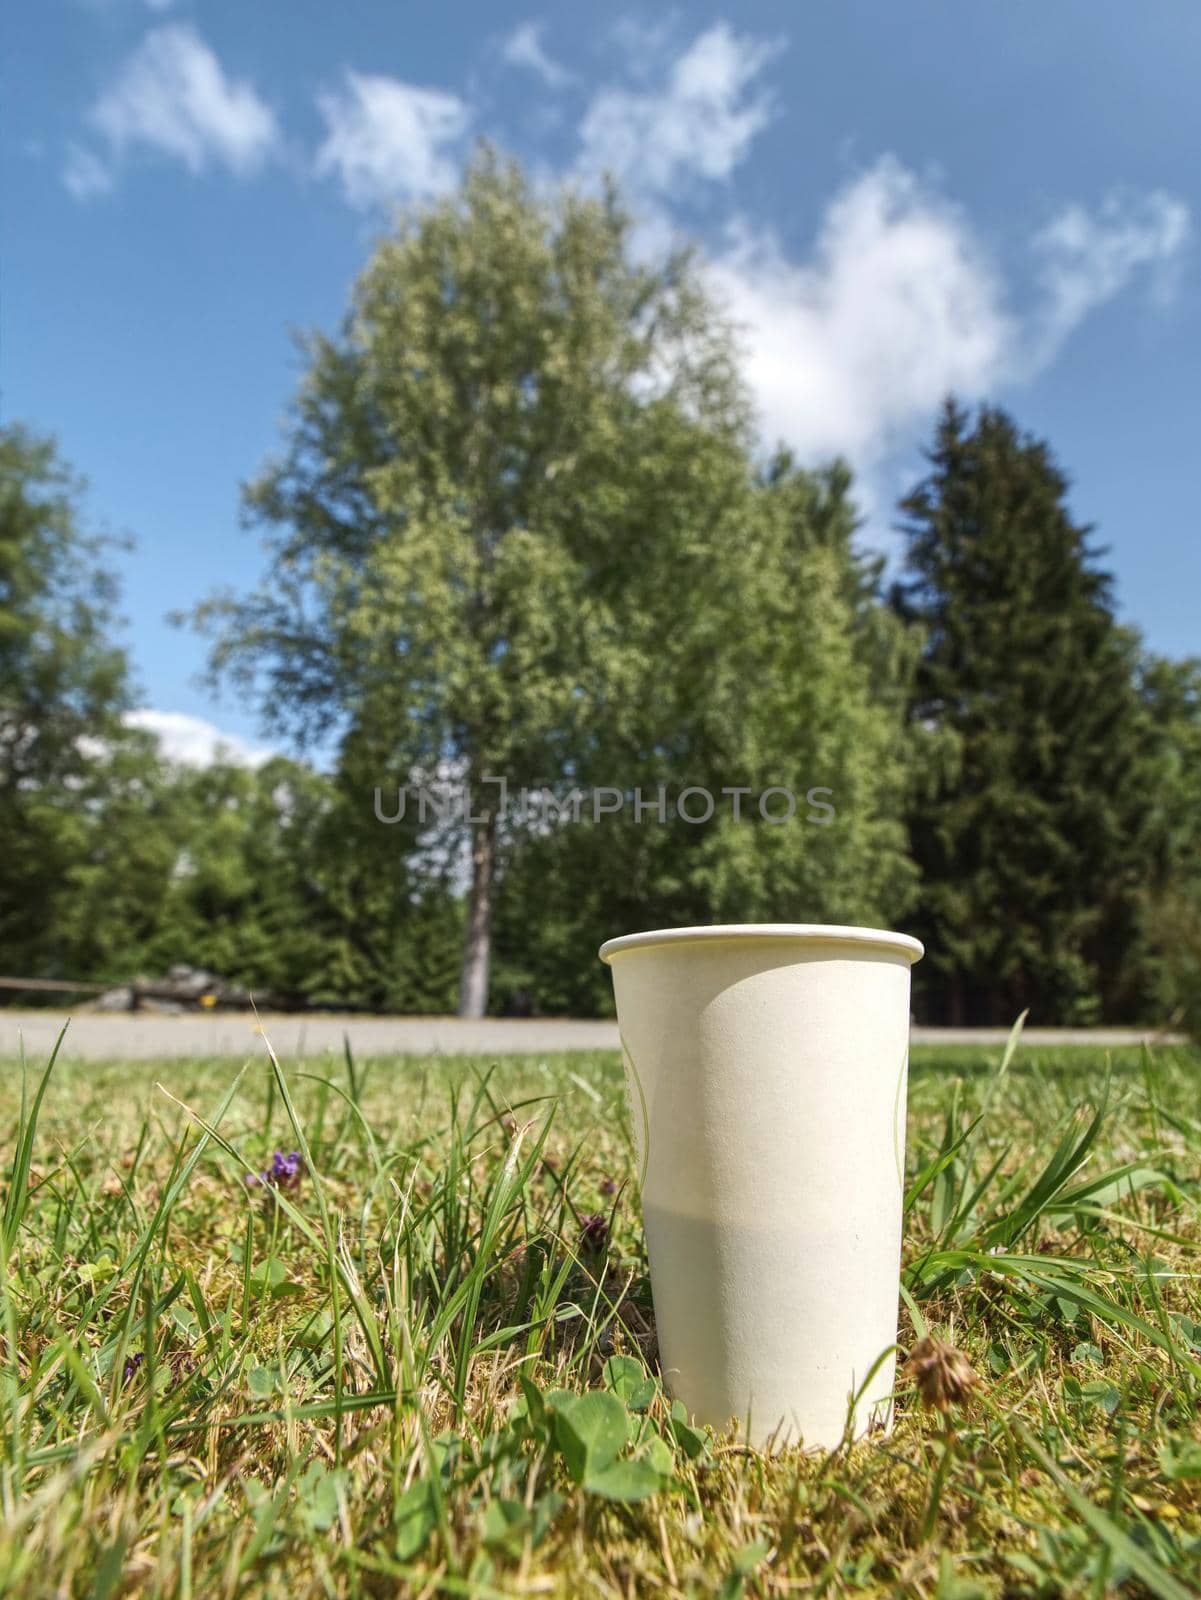 Holiday coffee cup. Aromatic coffee in takeaway paper cup in grass